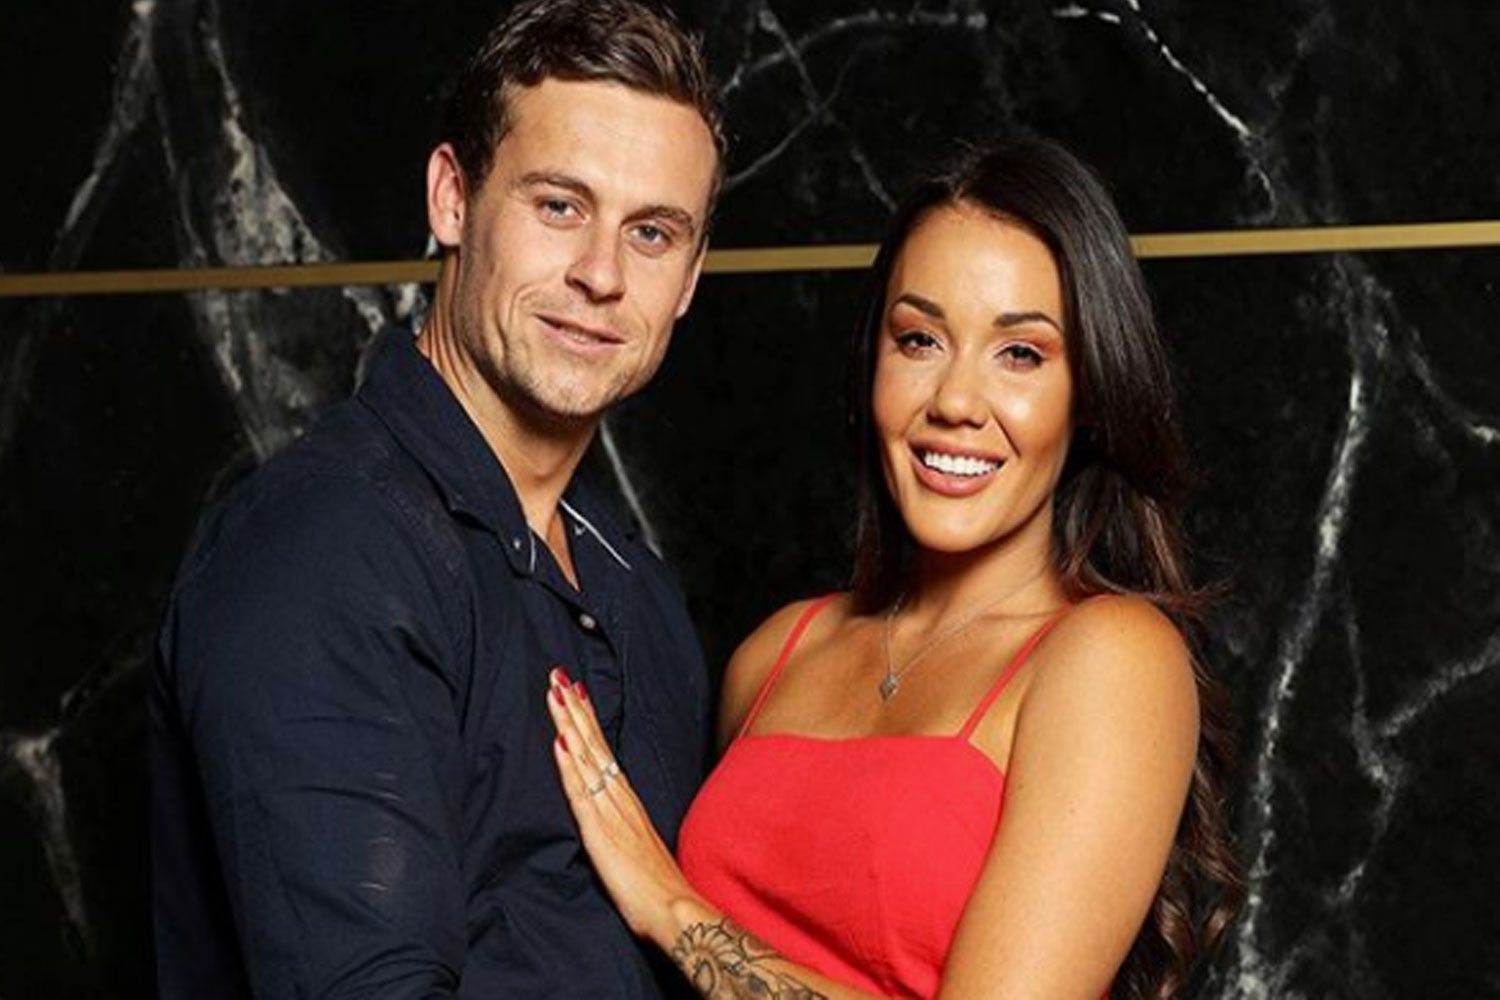 All the best Twitter reactions to Davina Rankin and Ryan Gallagher’s exit from Married At First Sight